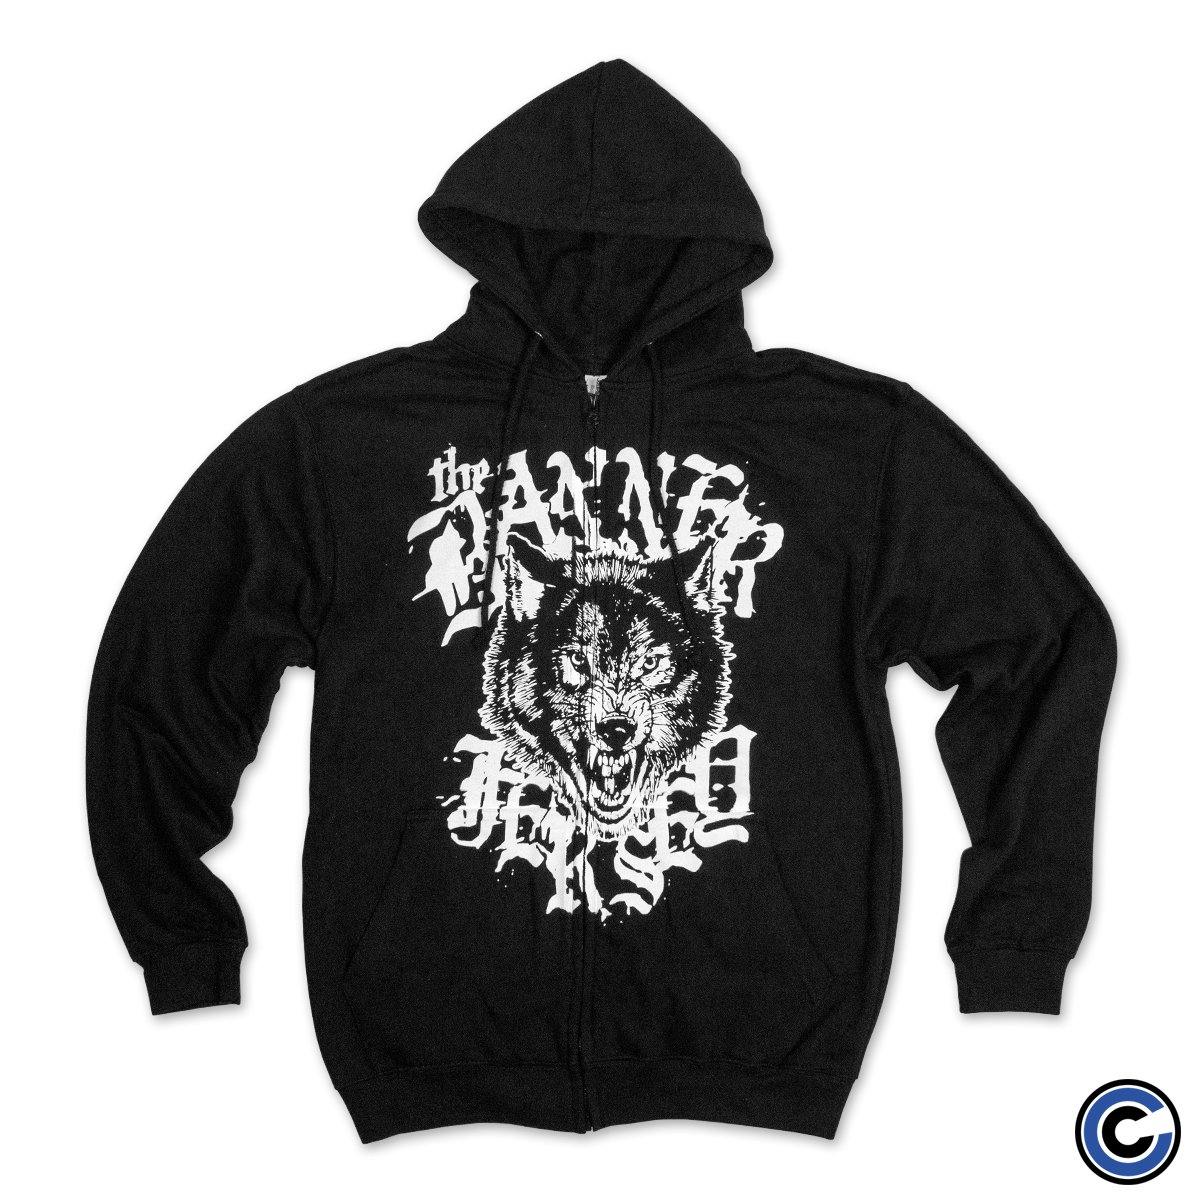 Buy – The Banner "Jersey Wolf" Zip Up Hoodie – Band & Music Merch – Cold Cuts Merch